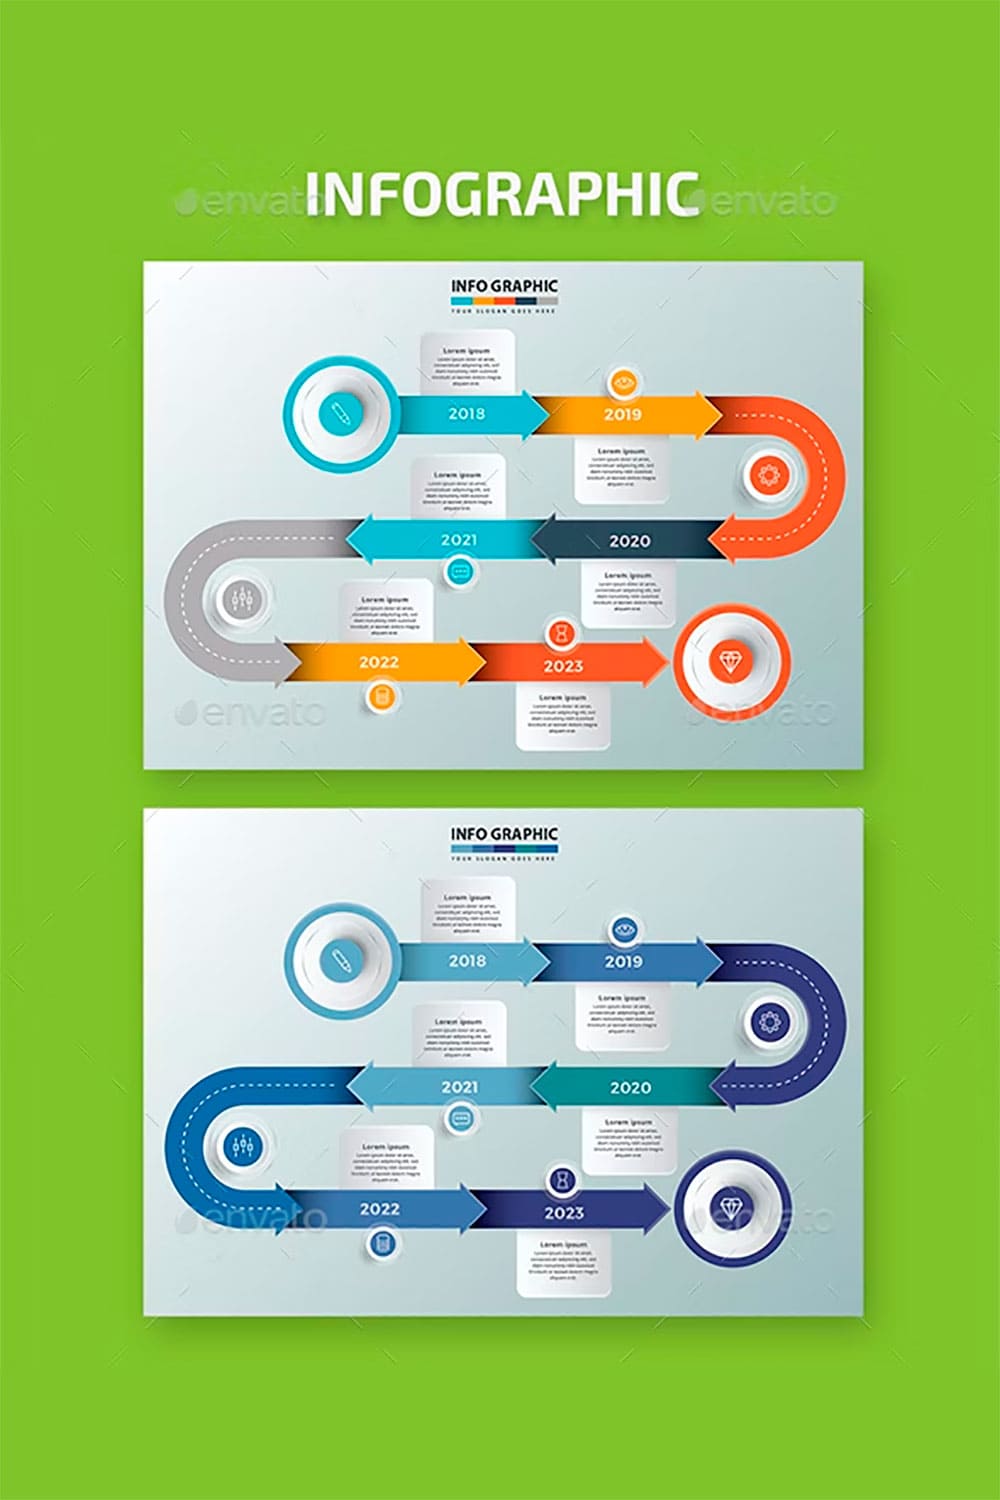 Timeline infographic design, picture for pinterest.